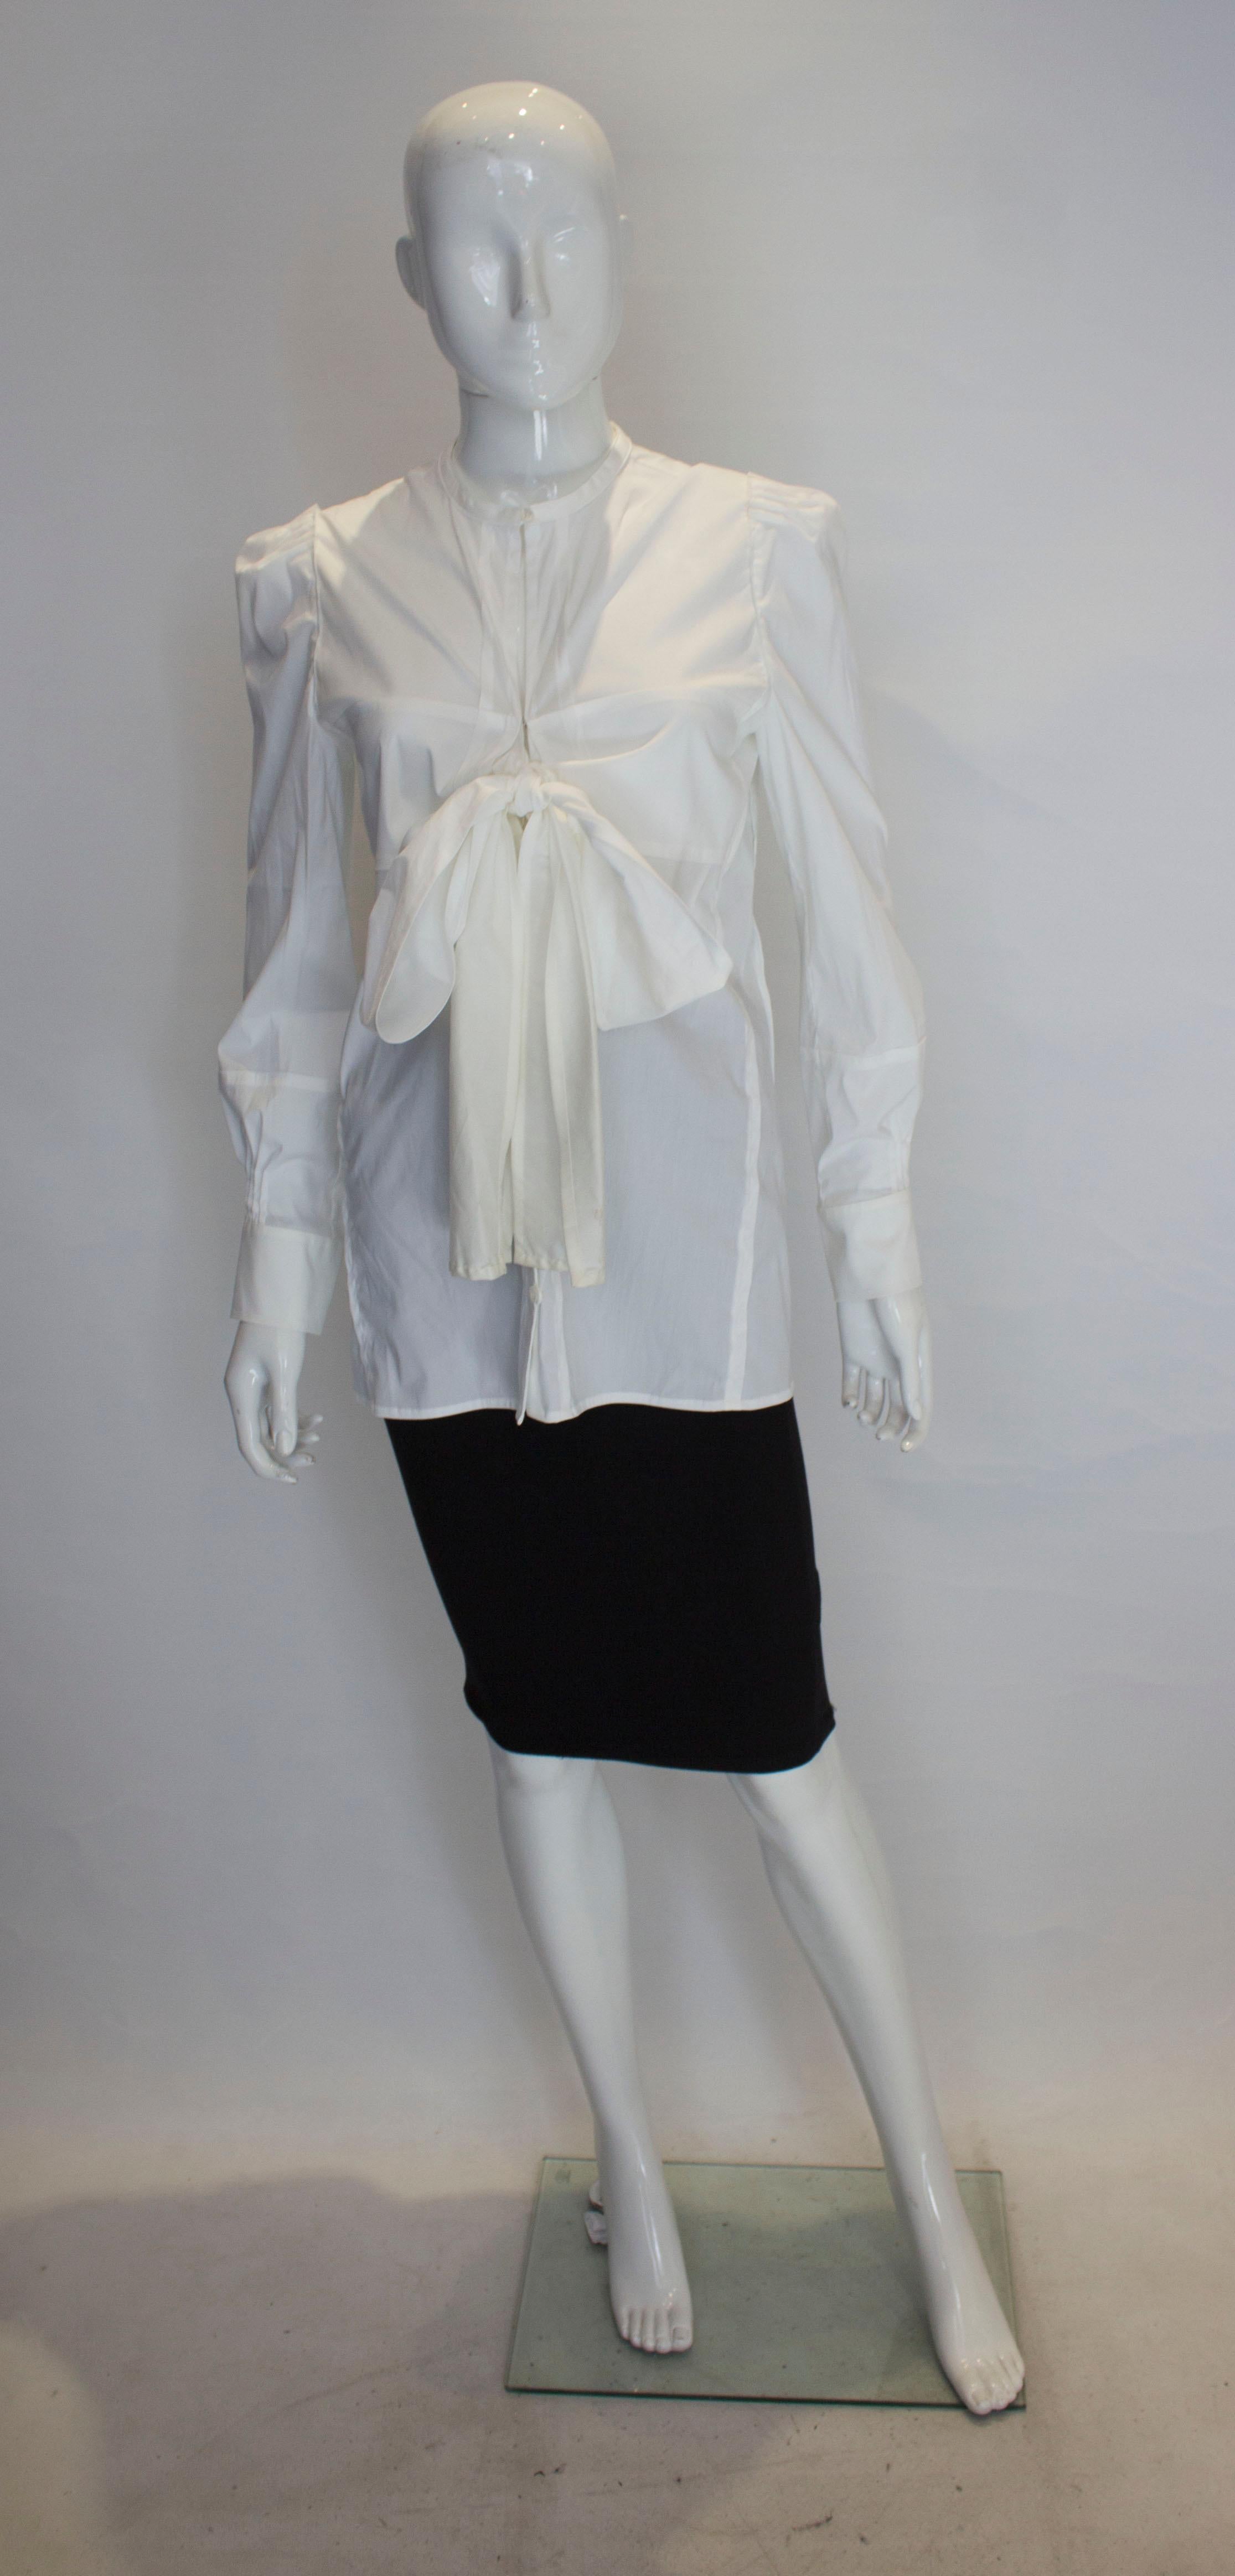 A chic shirt by Yves Saint Laurent Rive Gauche line. The shirt has attractive detail on the shoulder and cuffs. It is collarless with a v neckline, front button opening and tie detail.